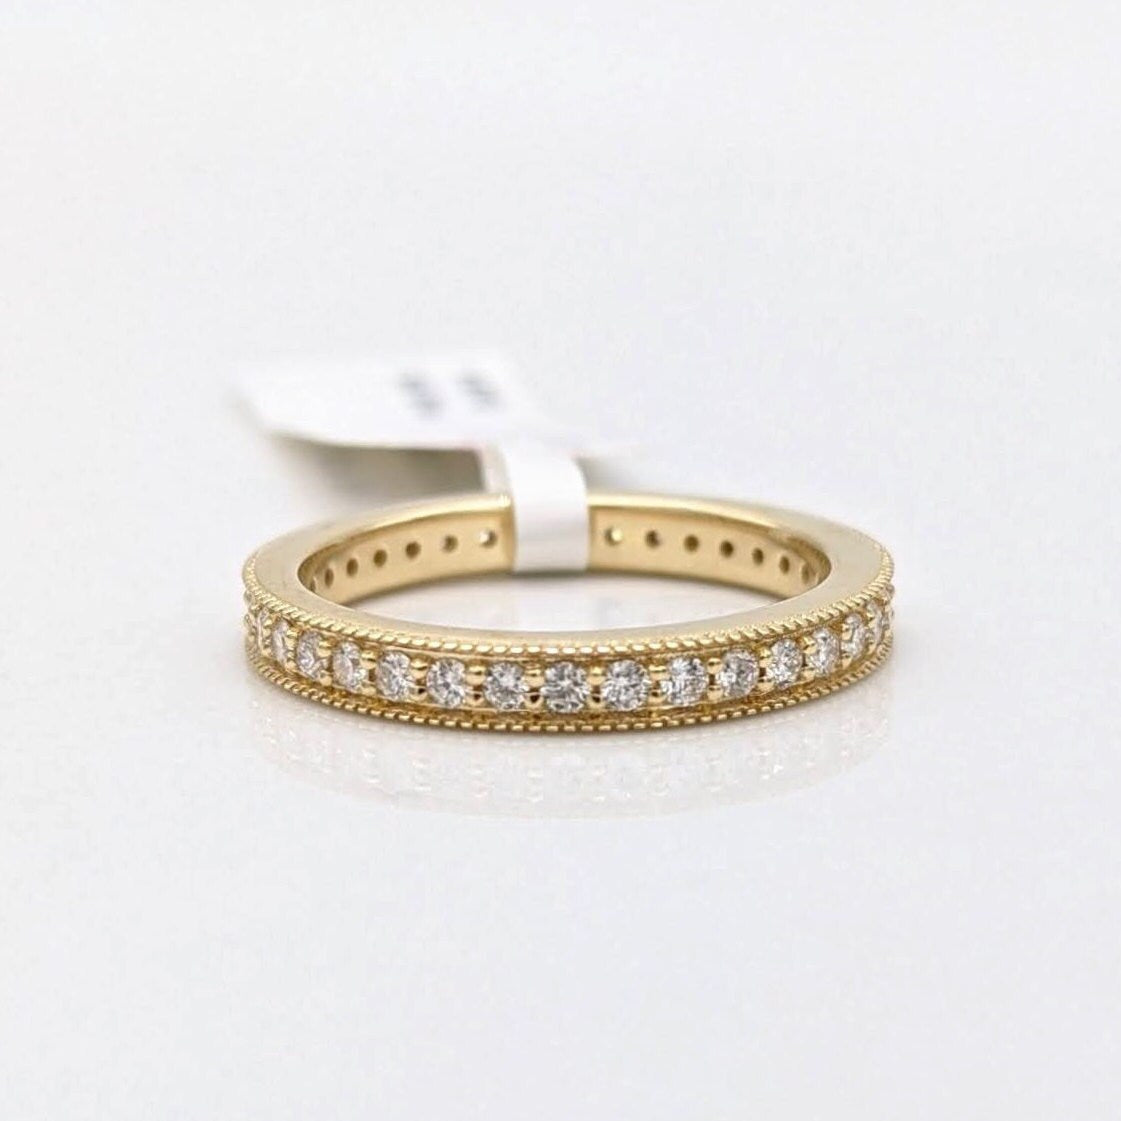 Diamond Eternity Band in Solid 14k Yellow Gold with Milgrain Detailing || Coin Edging || Stackable Band || Wedding Anniversary Engagement